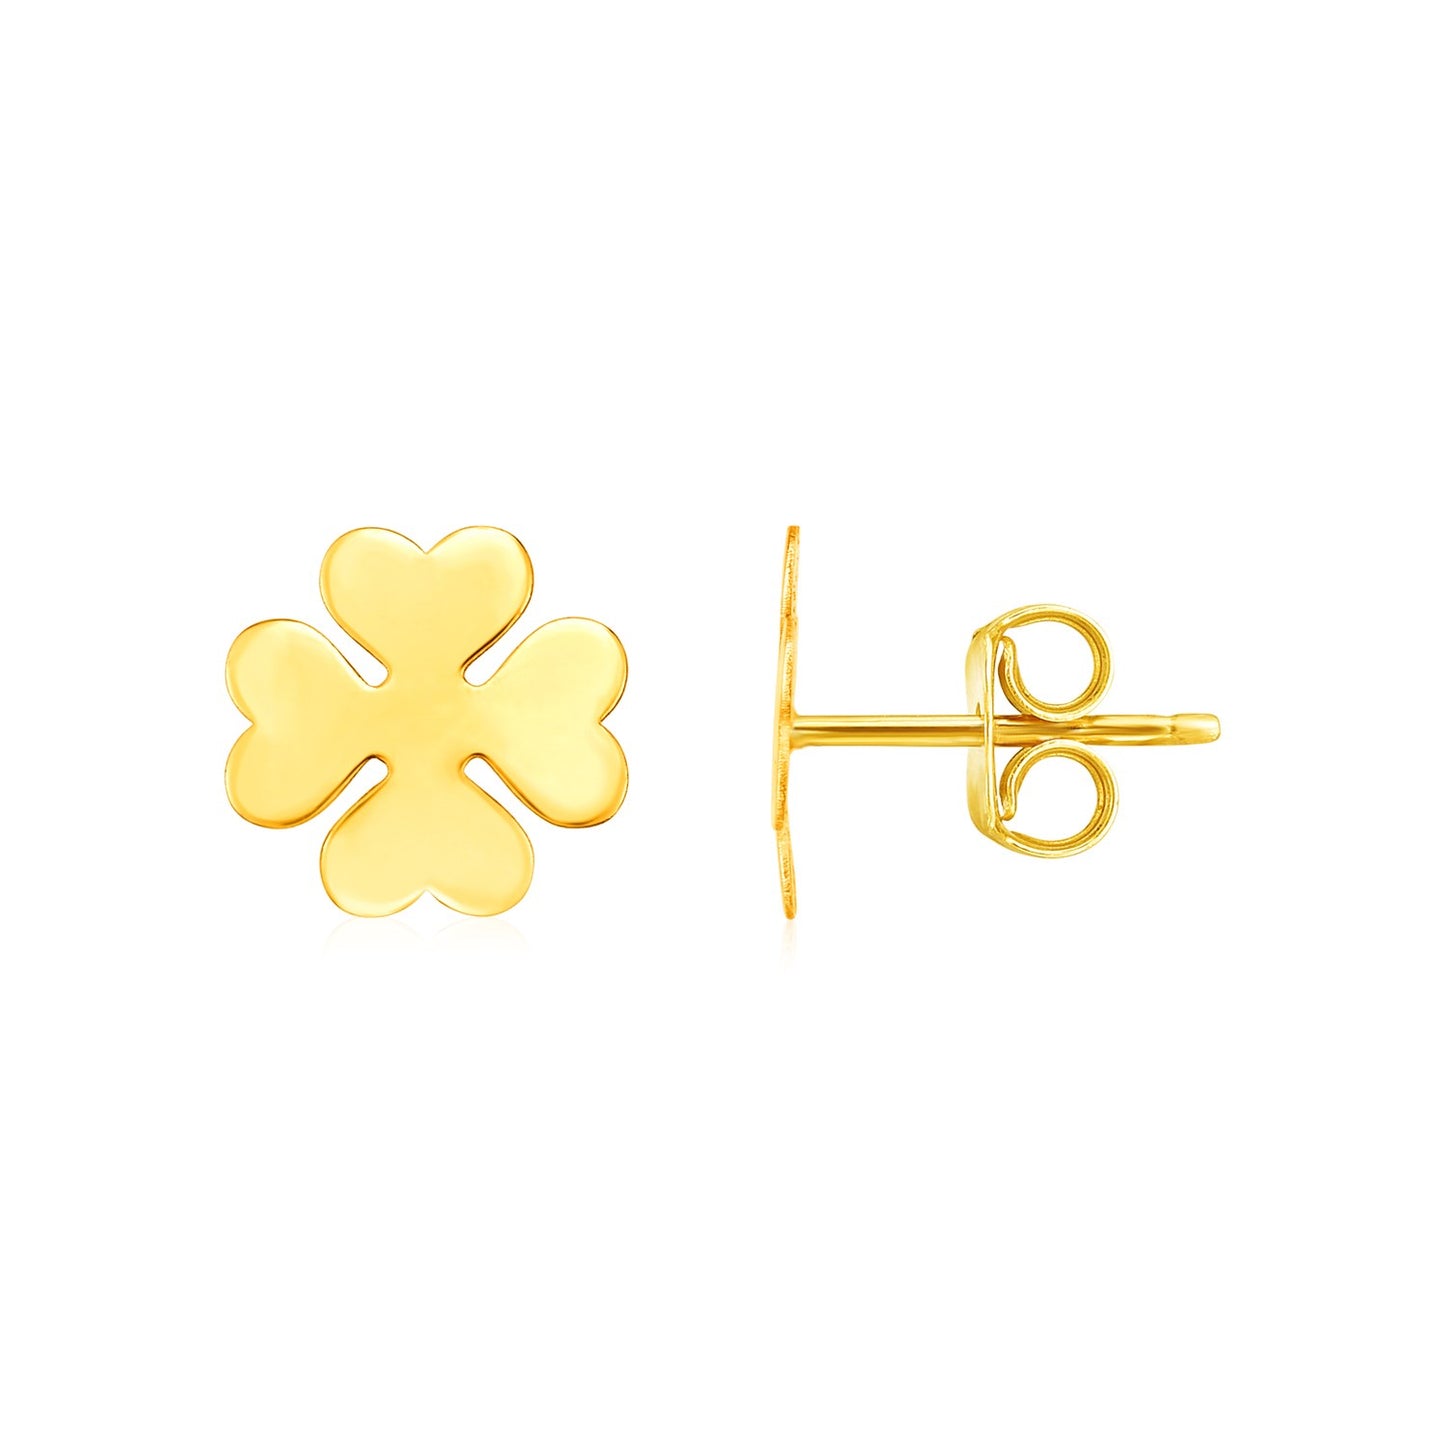 14K Yellow Gold Four Leaf Clover Earrings